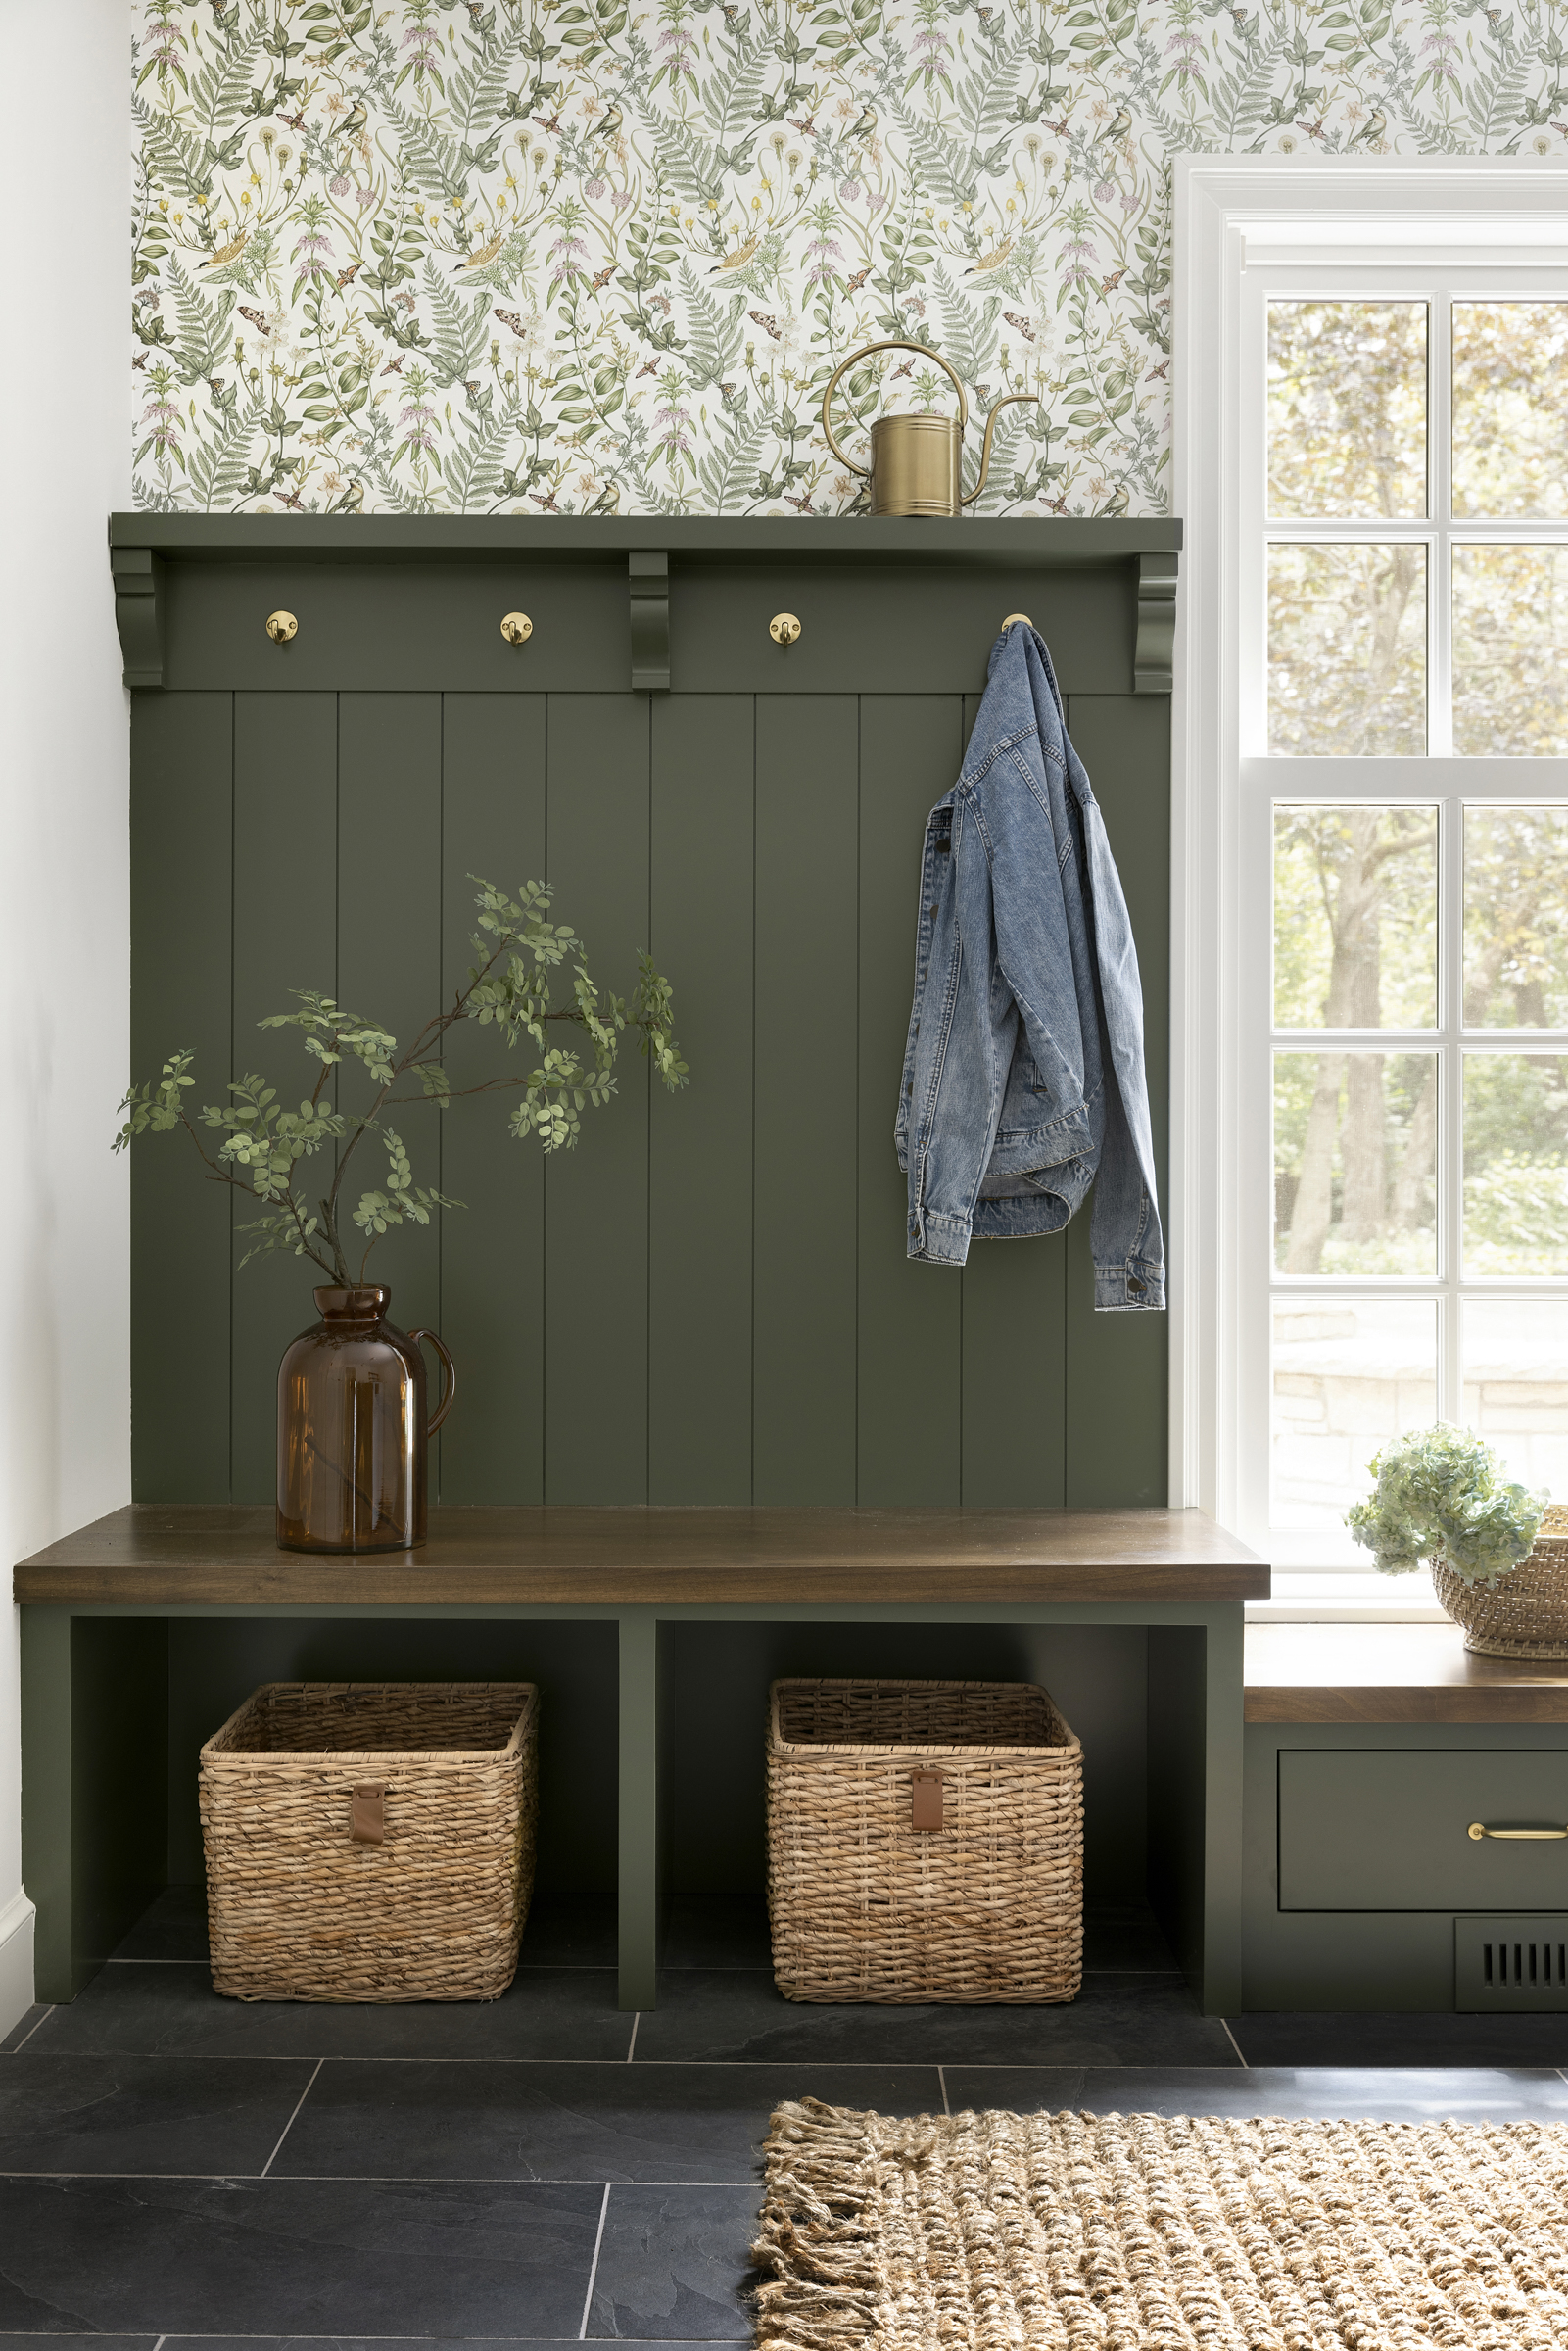 Twin Cities mudroom renovation with green paneling, botanical wallpaper, and window seat.